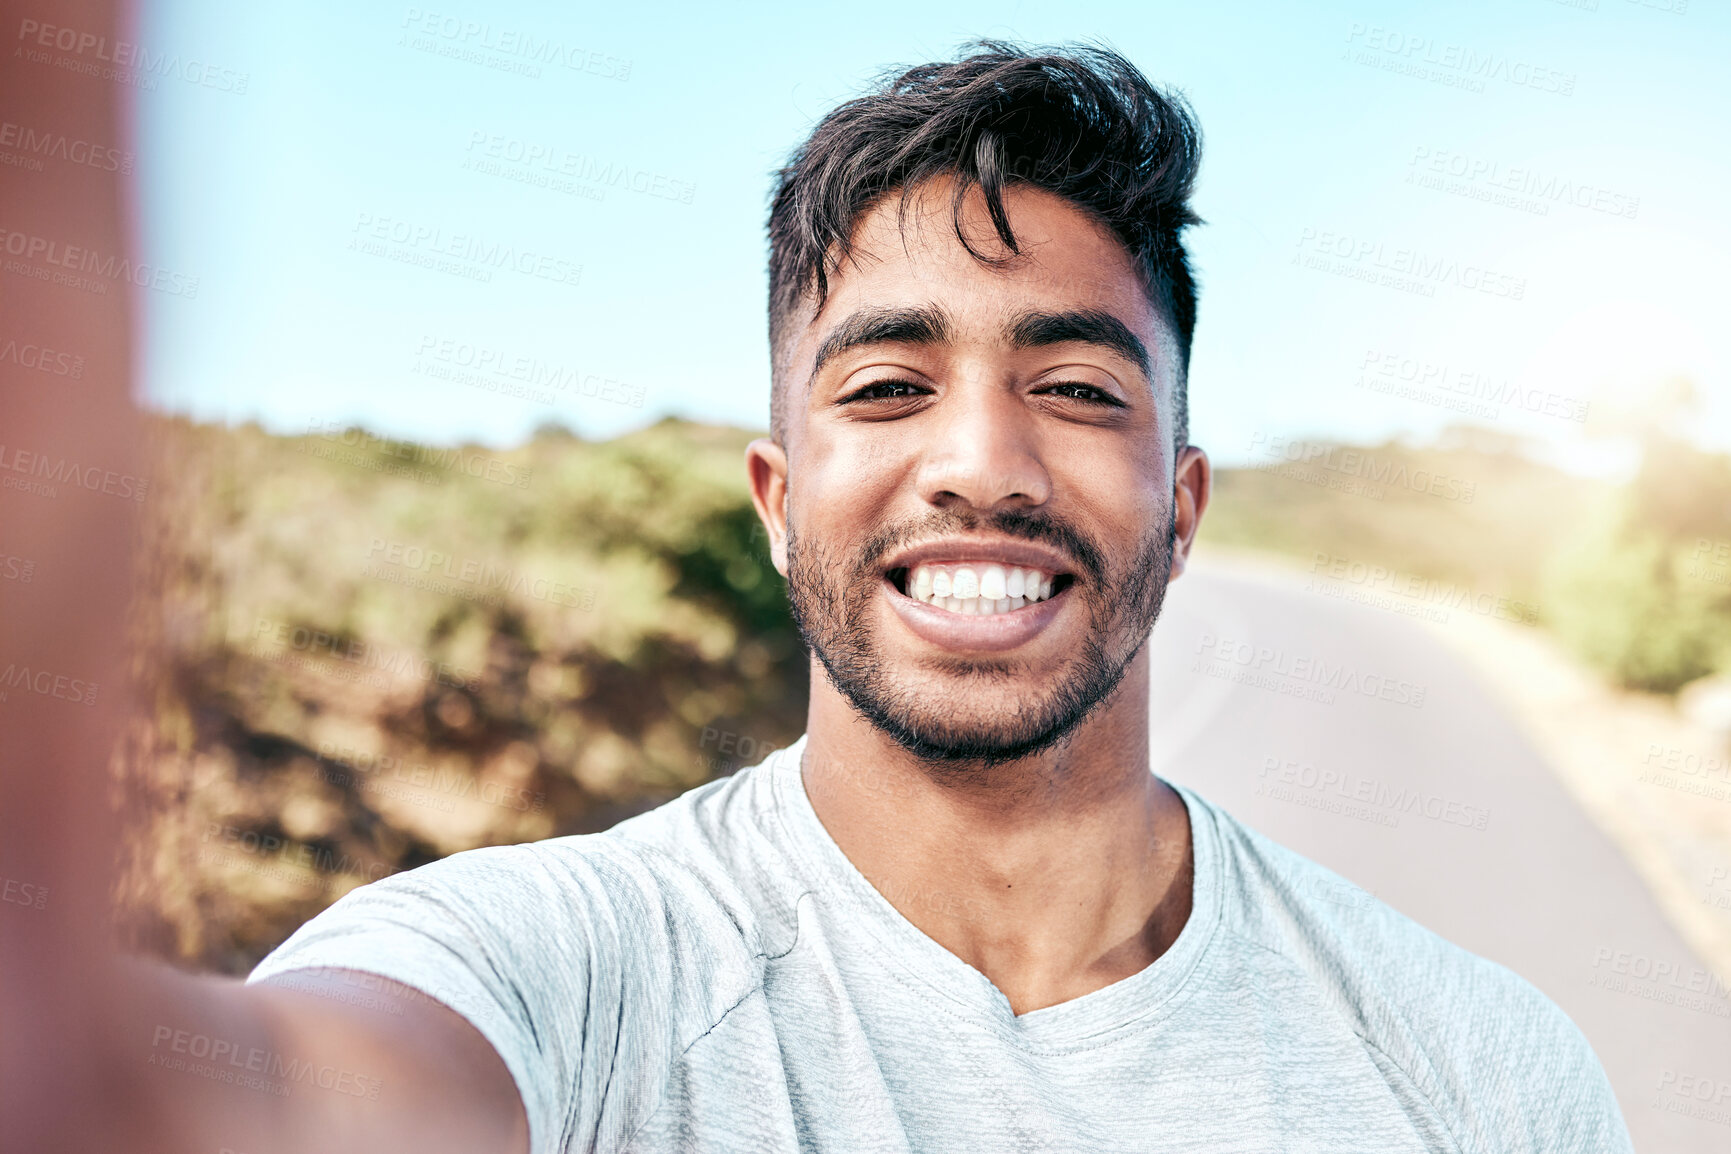 Buy stock photo Closeup fit mixed race man taking a selfie while out for a run. Handsome hispanic male athlete smiling for a self portrait photograph while exercising outdoors. Taking pictures on his fitness journey